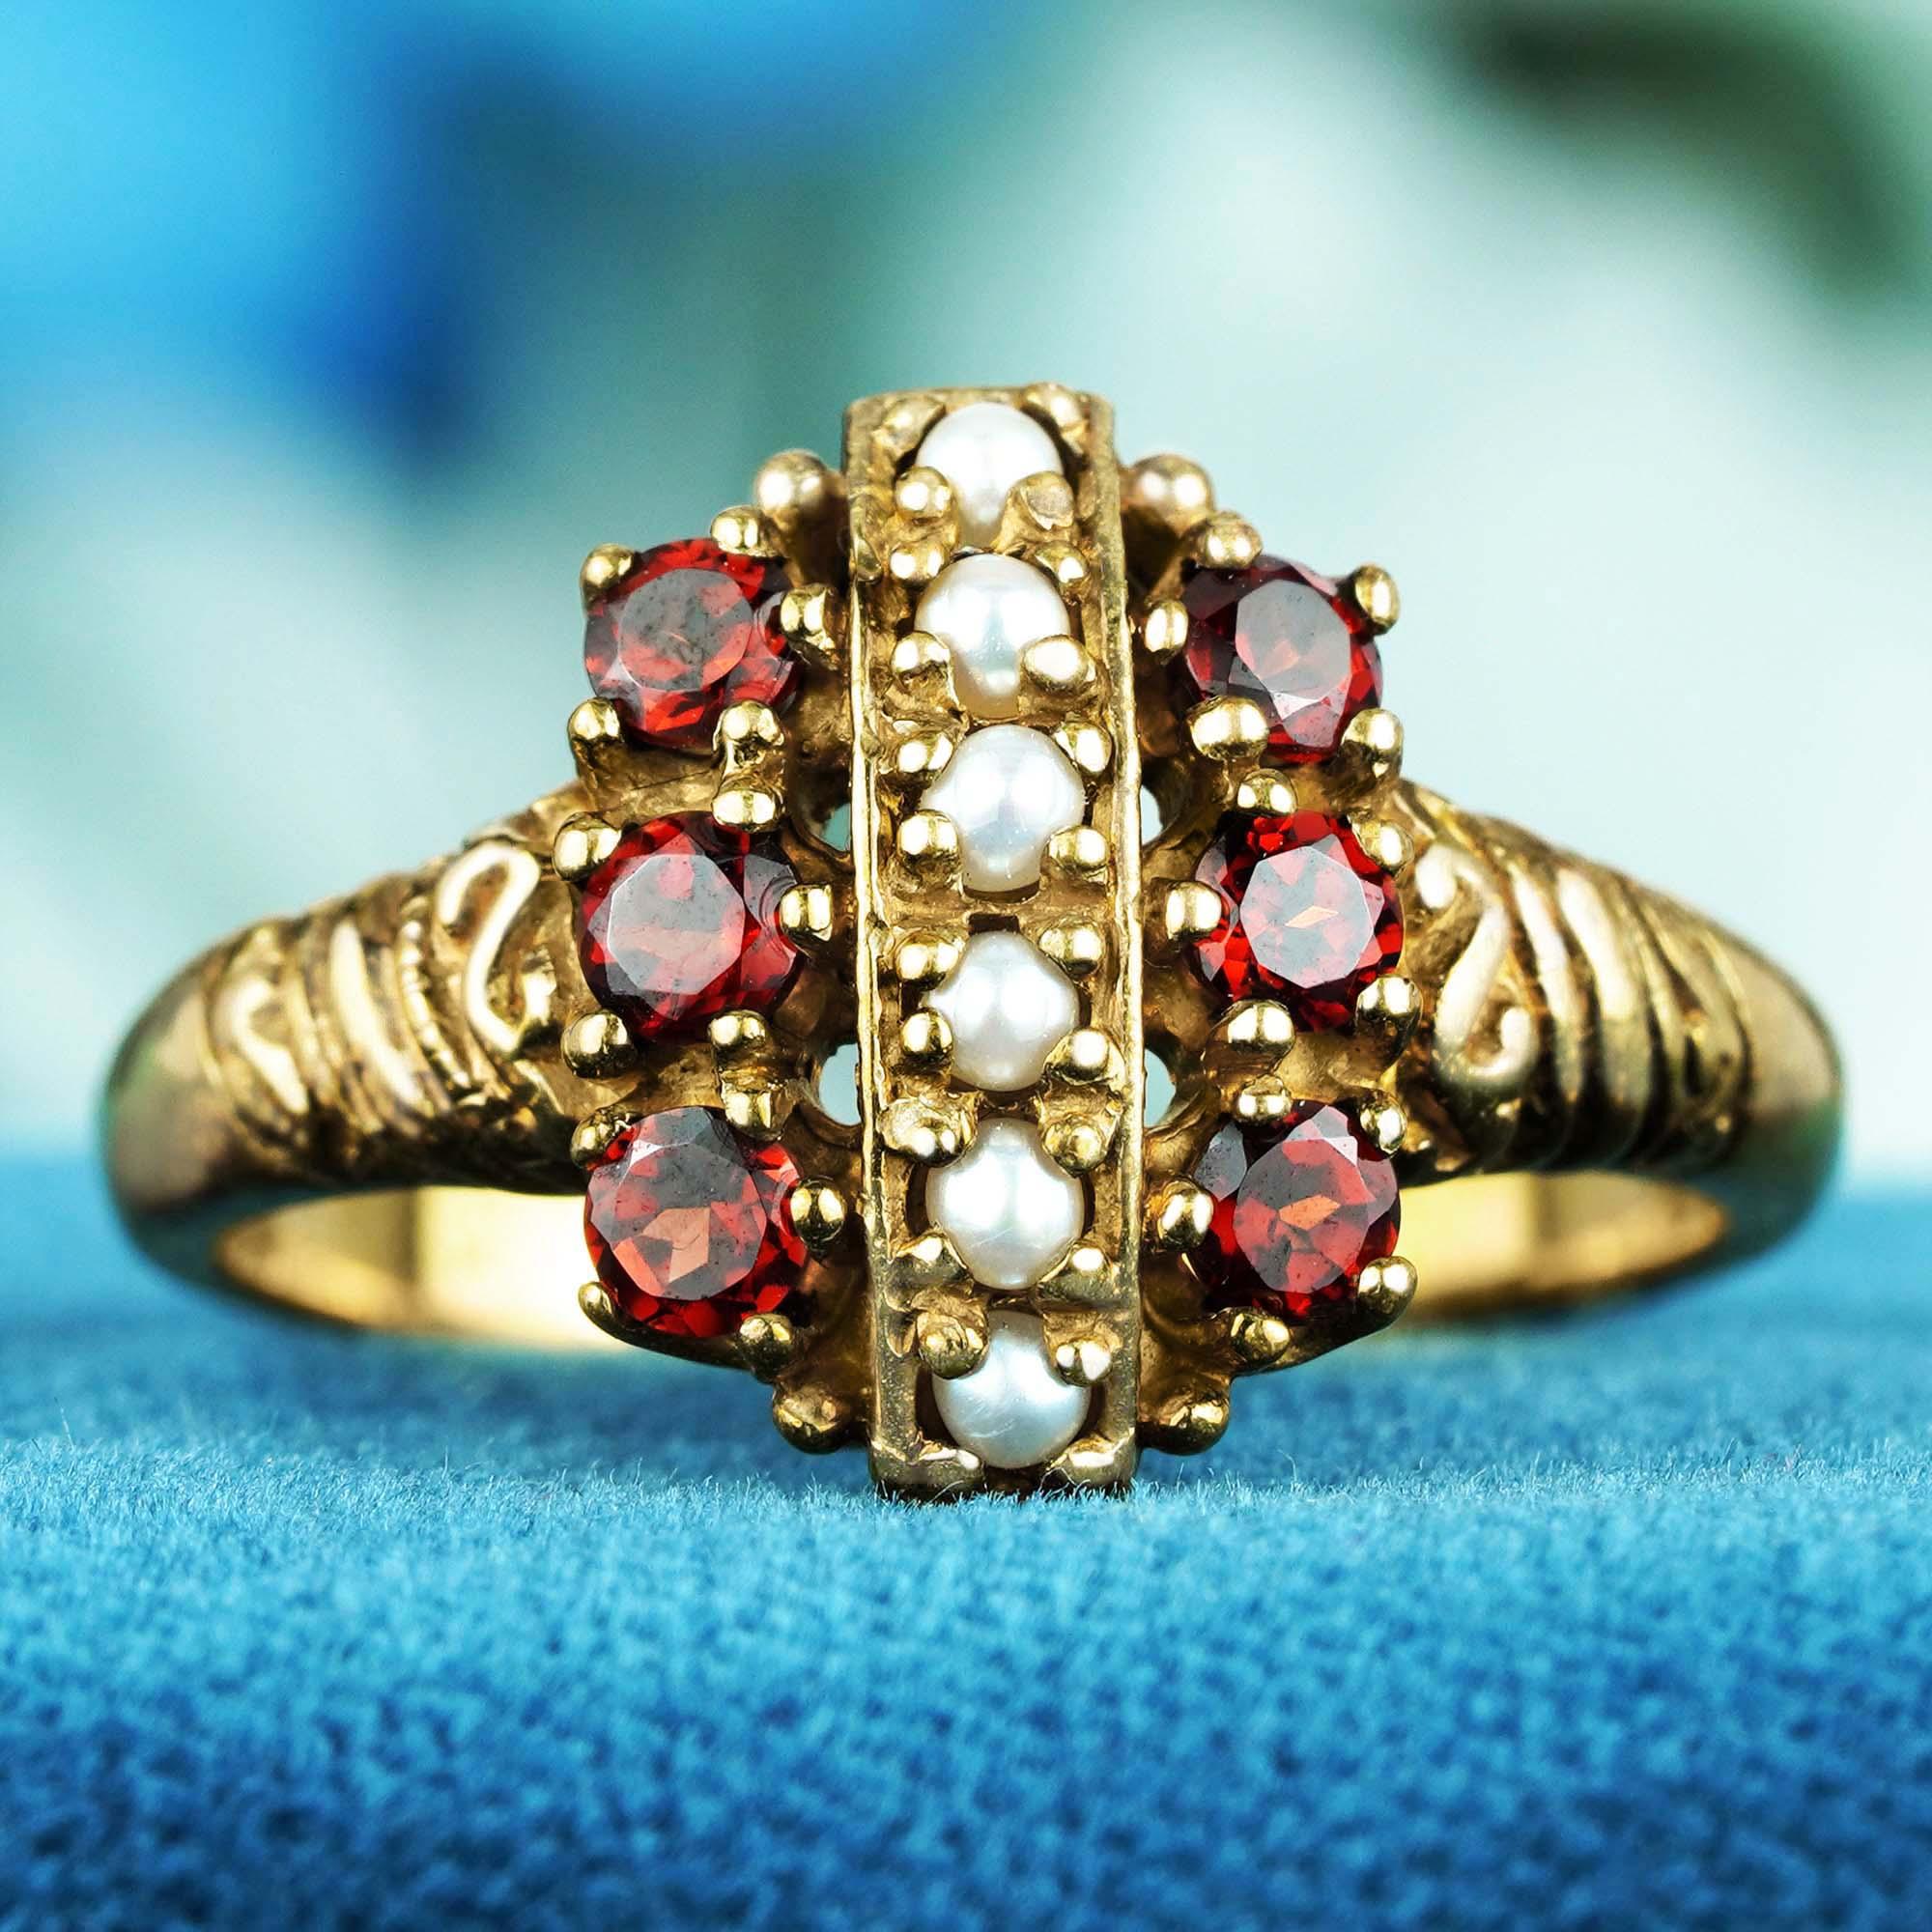 For Sale:  Natural Garnet and Pearl Vintage Style Cluster Ring in Solid 9K Gold 2